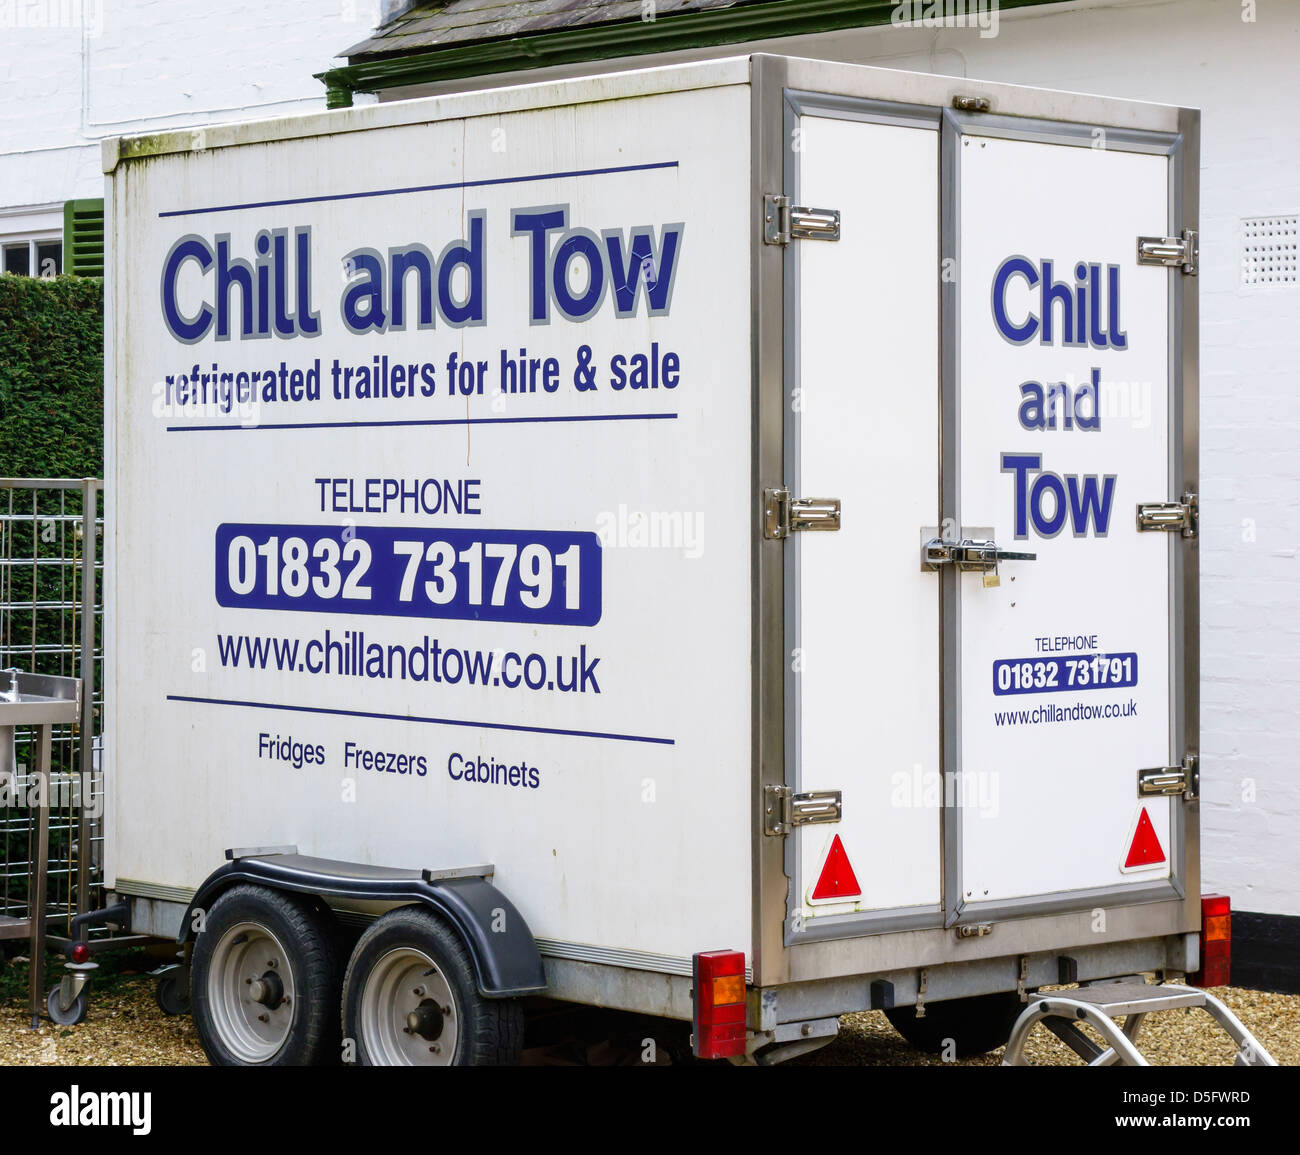 Chill and Tow Refrigerated Trailer Hire Stock Photo